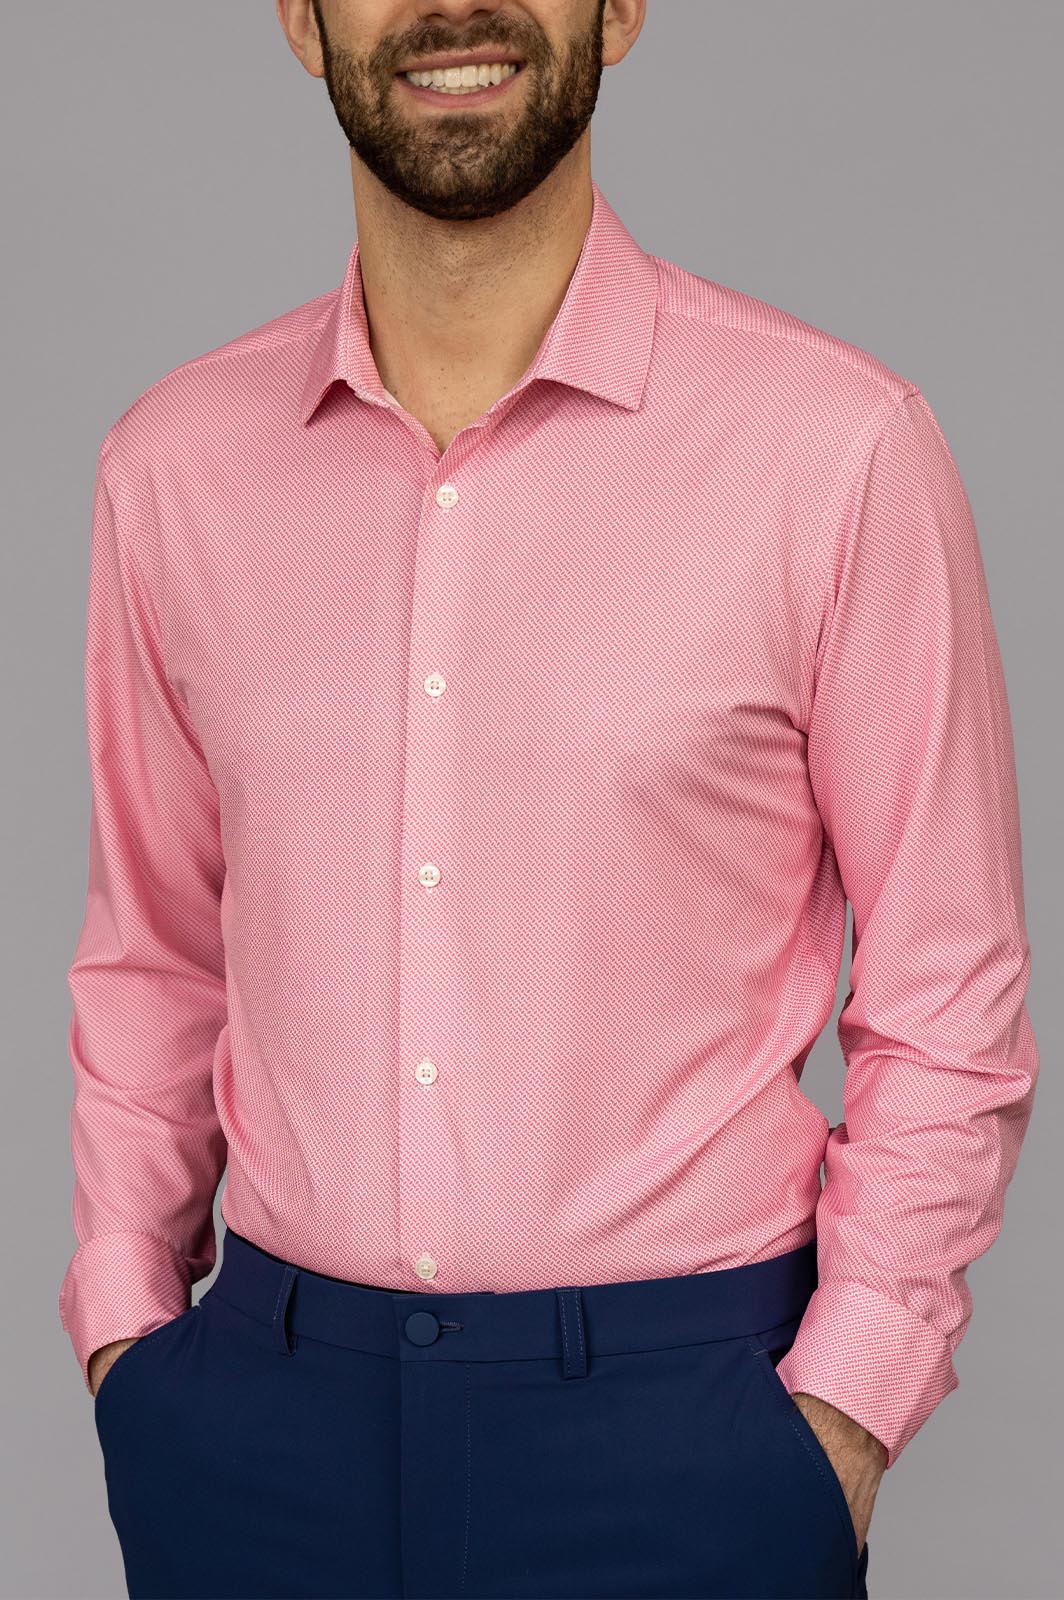 Sustainable Men's White and Pink Long Sleeve Dress Shirt - State of ...